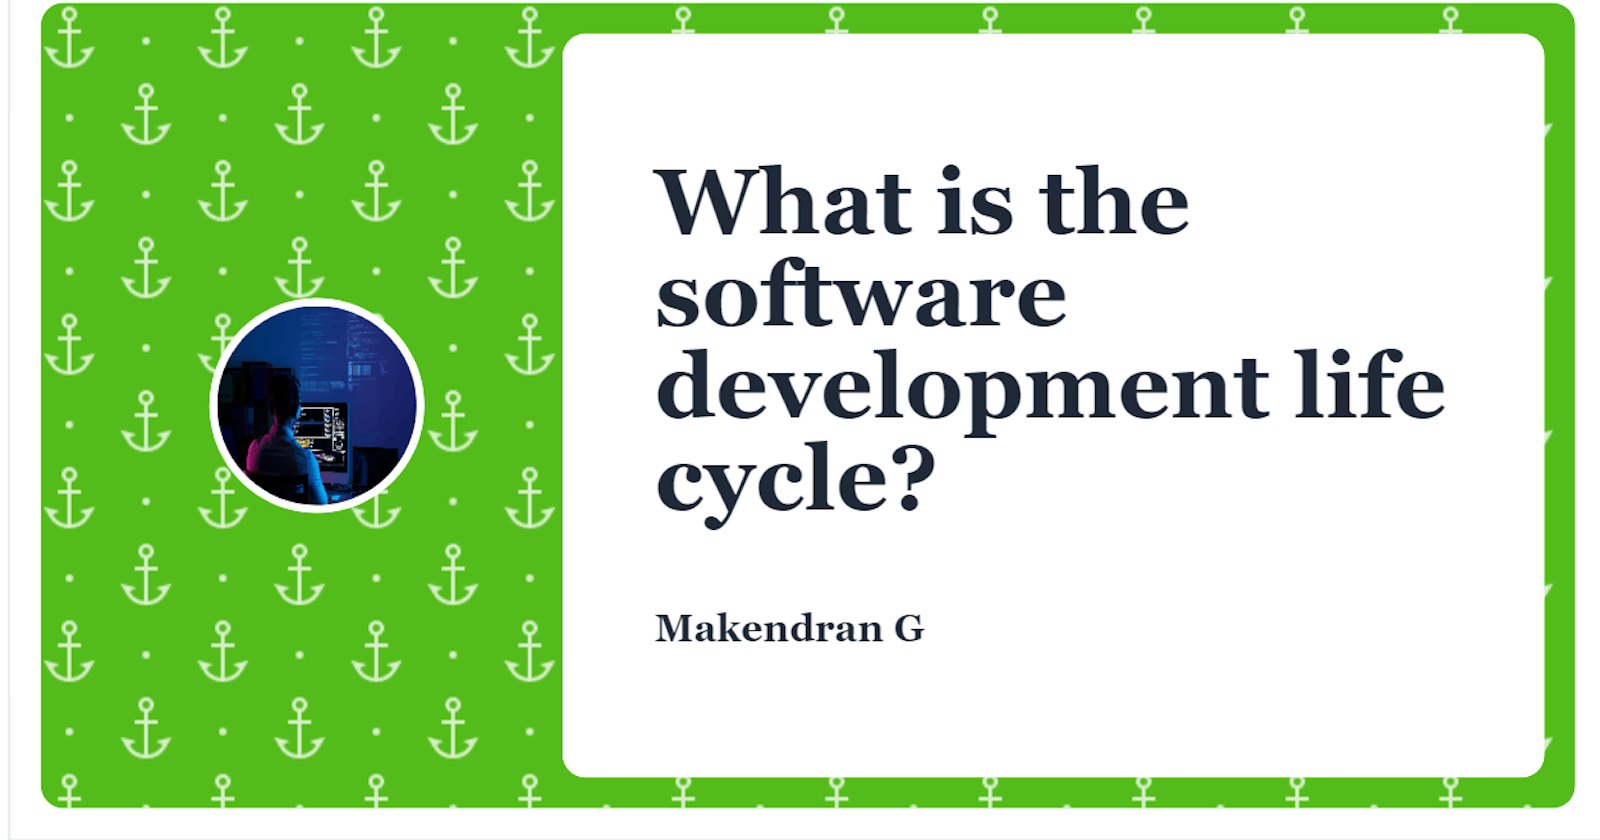 What is the software development life cycle?